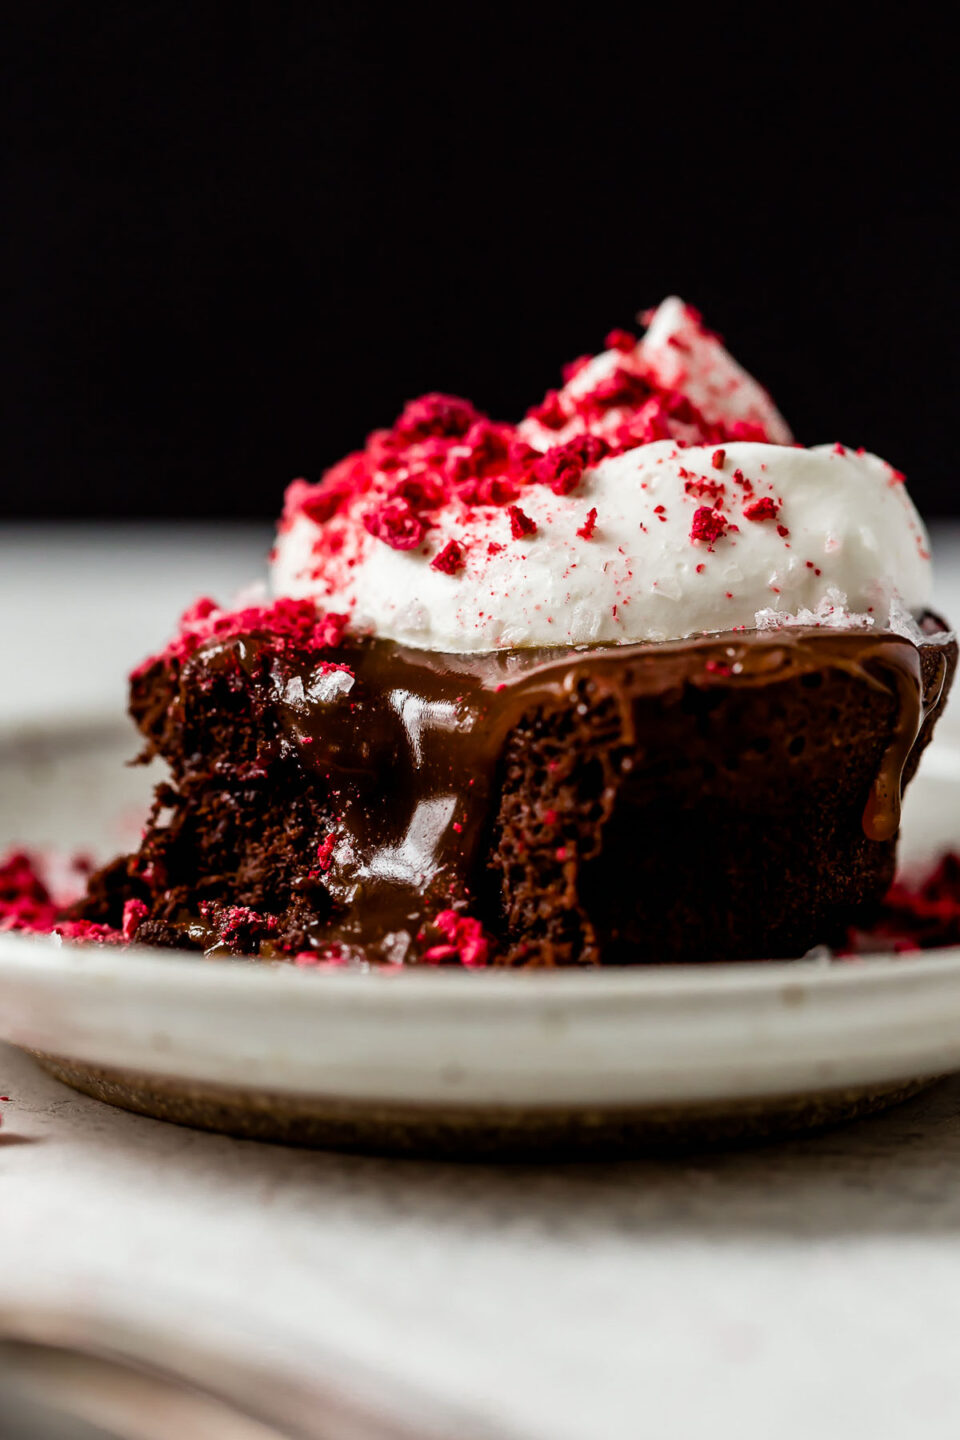 A mini flourless chocolate cake rests atop a white ceramic plate on a creamy white textured surface. The cake has been topped with caramel, whipped cream, crushed freeze-dried raspberries, and flaky sea salt.